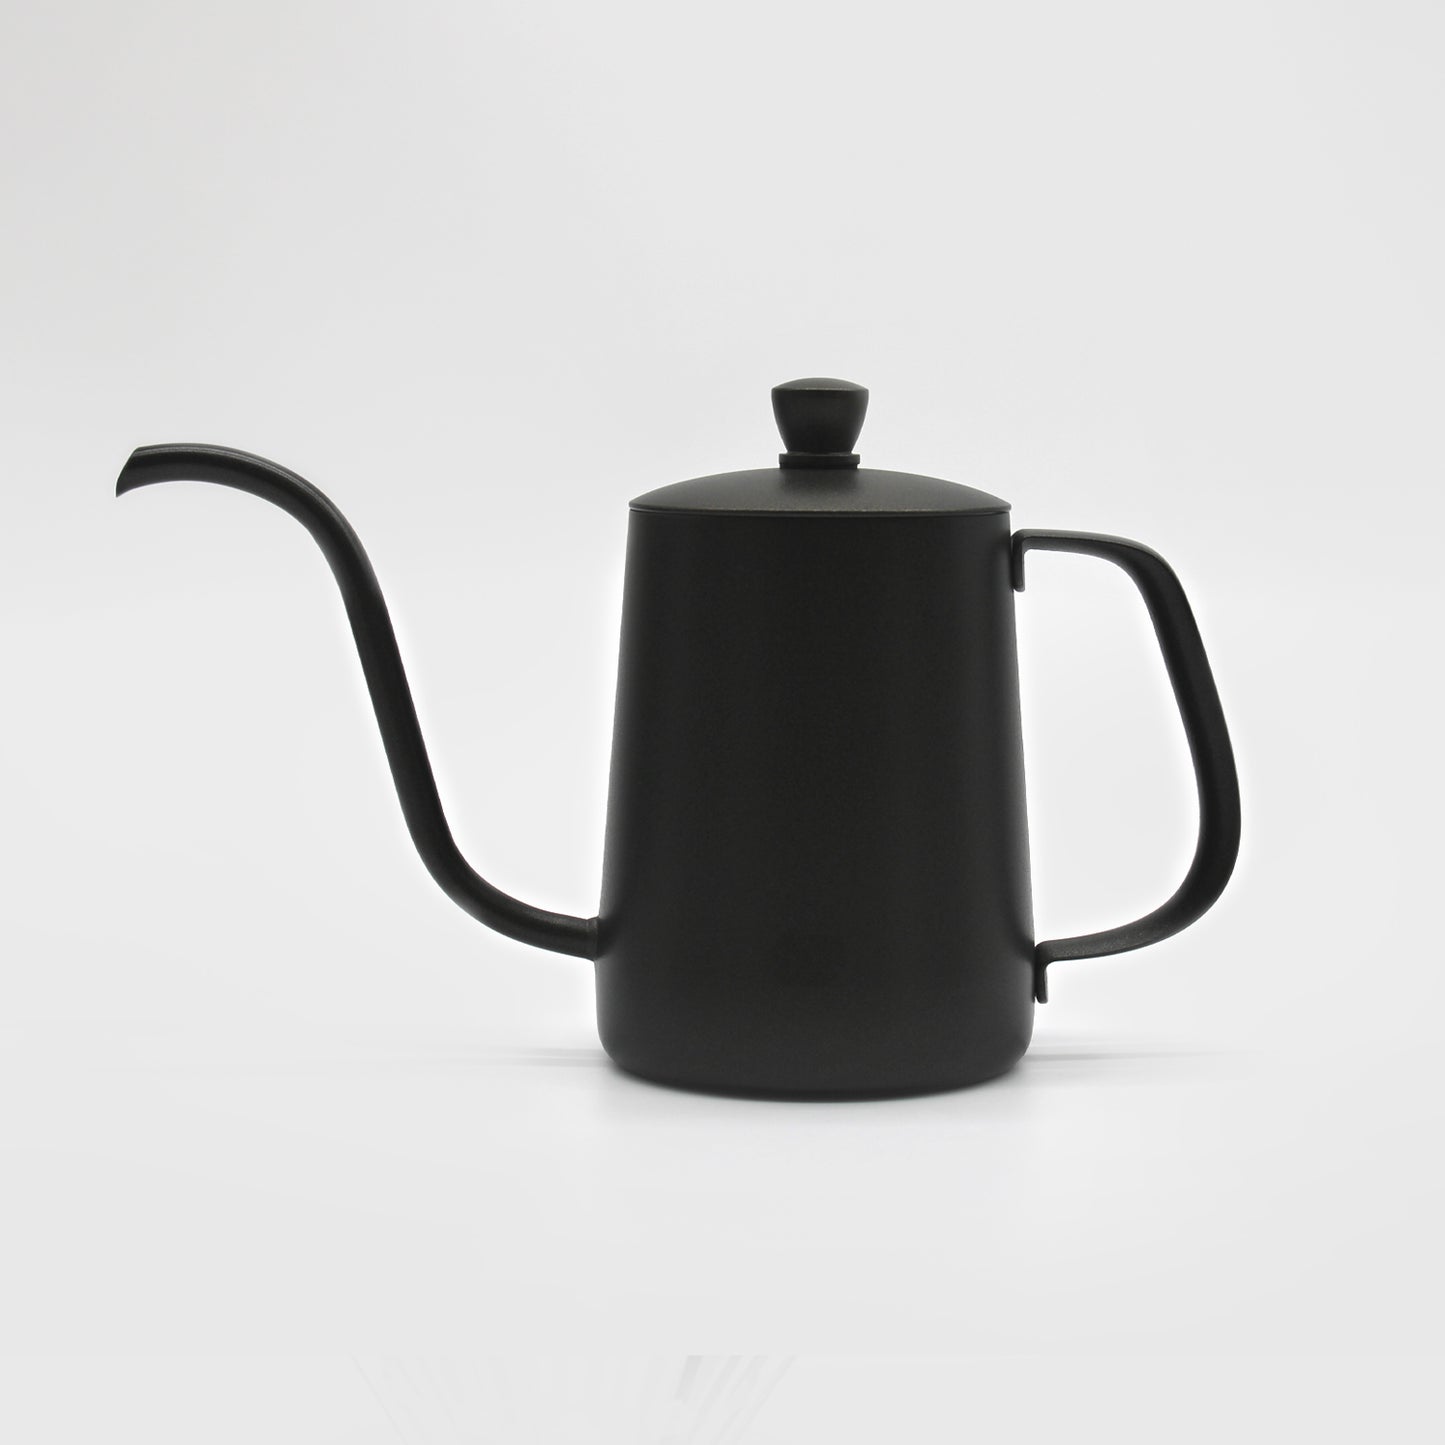 Black, stainless steel Timemore Gooseneck Pour-over kettle with C handle. 1 of 6.